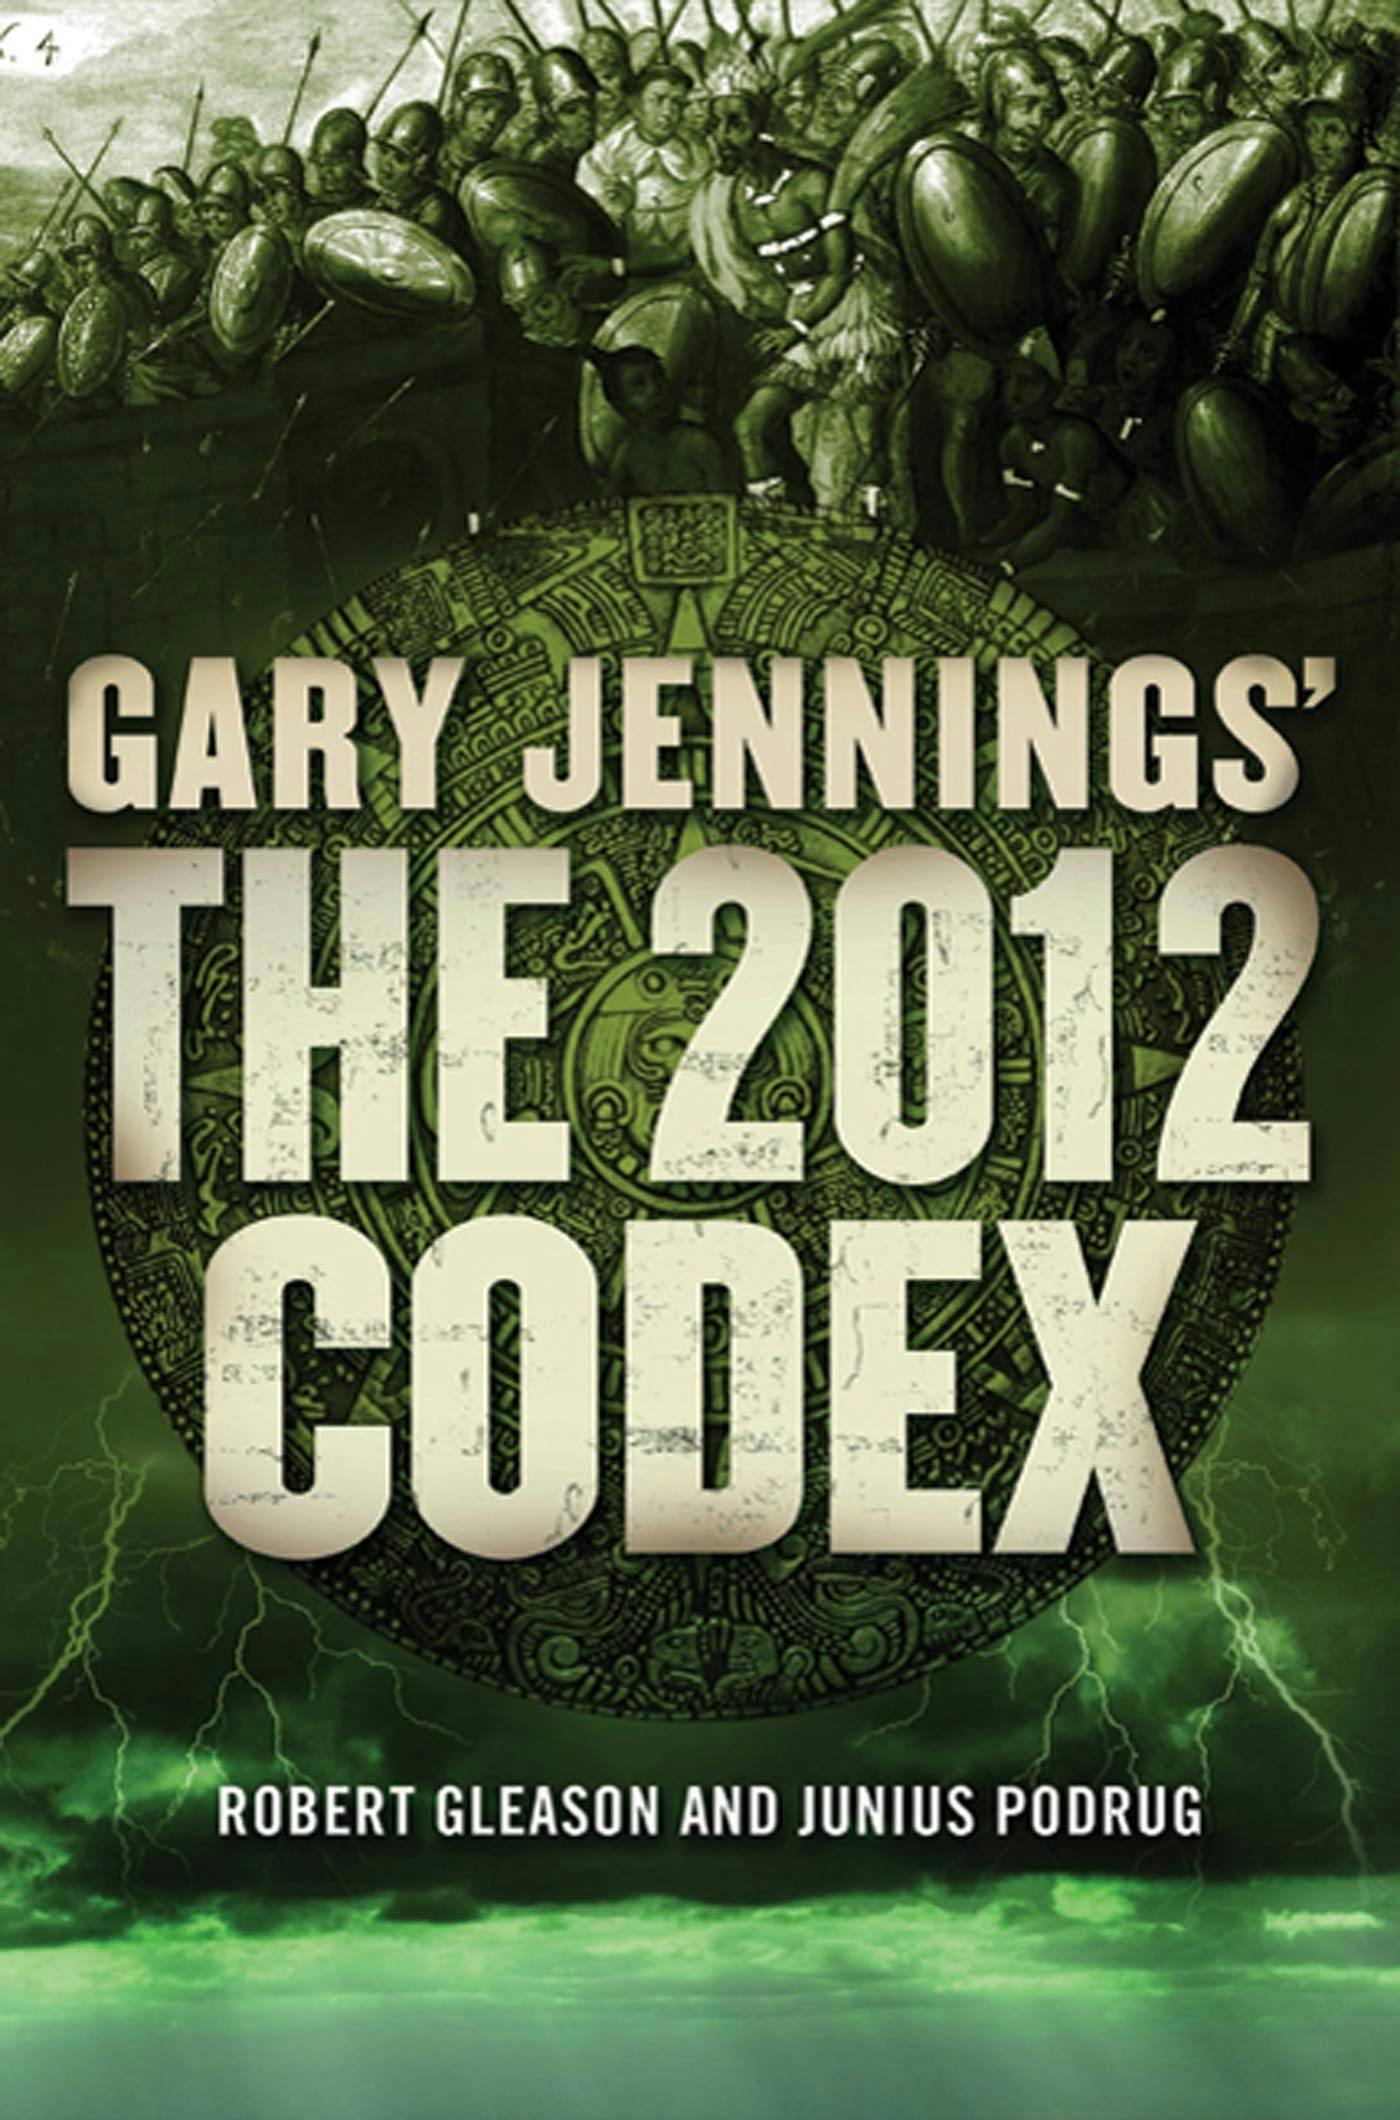 Cover for the book titled as: The 2012 Codex